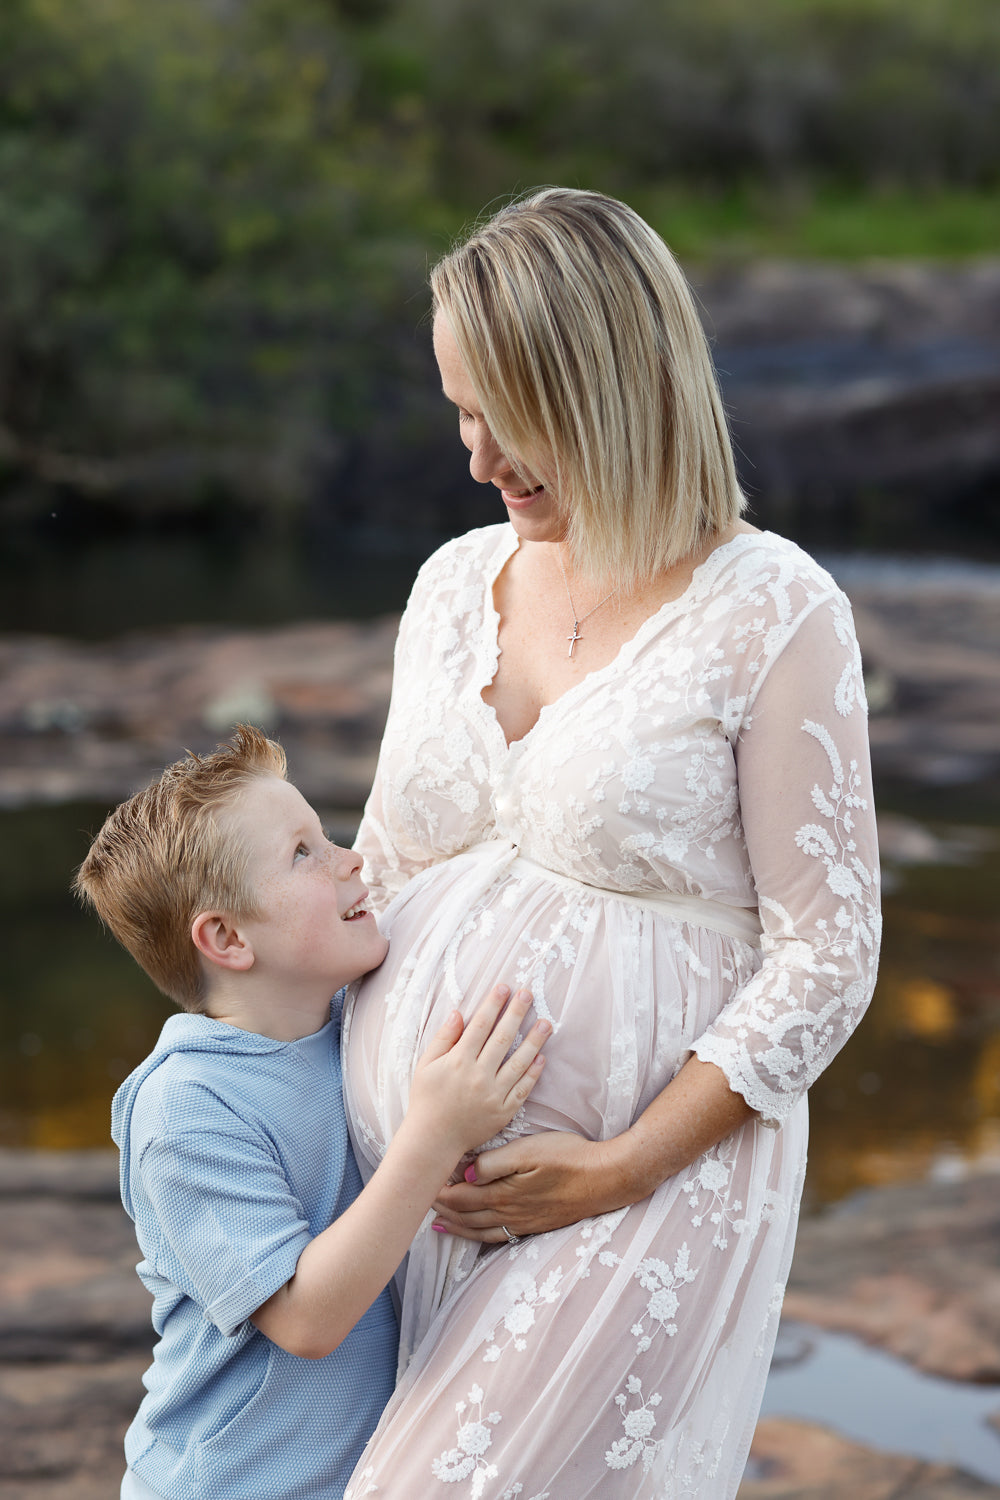 Family Inclusive Maternity Photography: Celebrating the Expanding Circle of Love